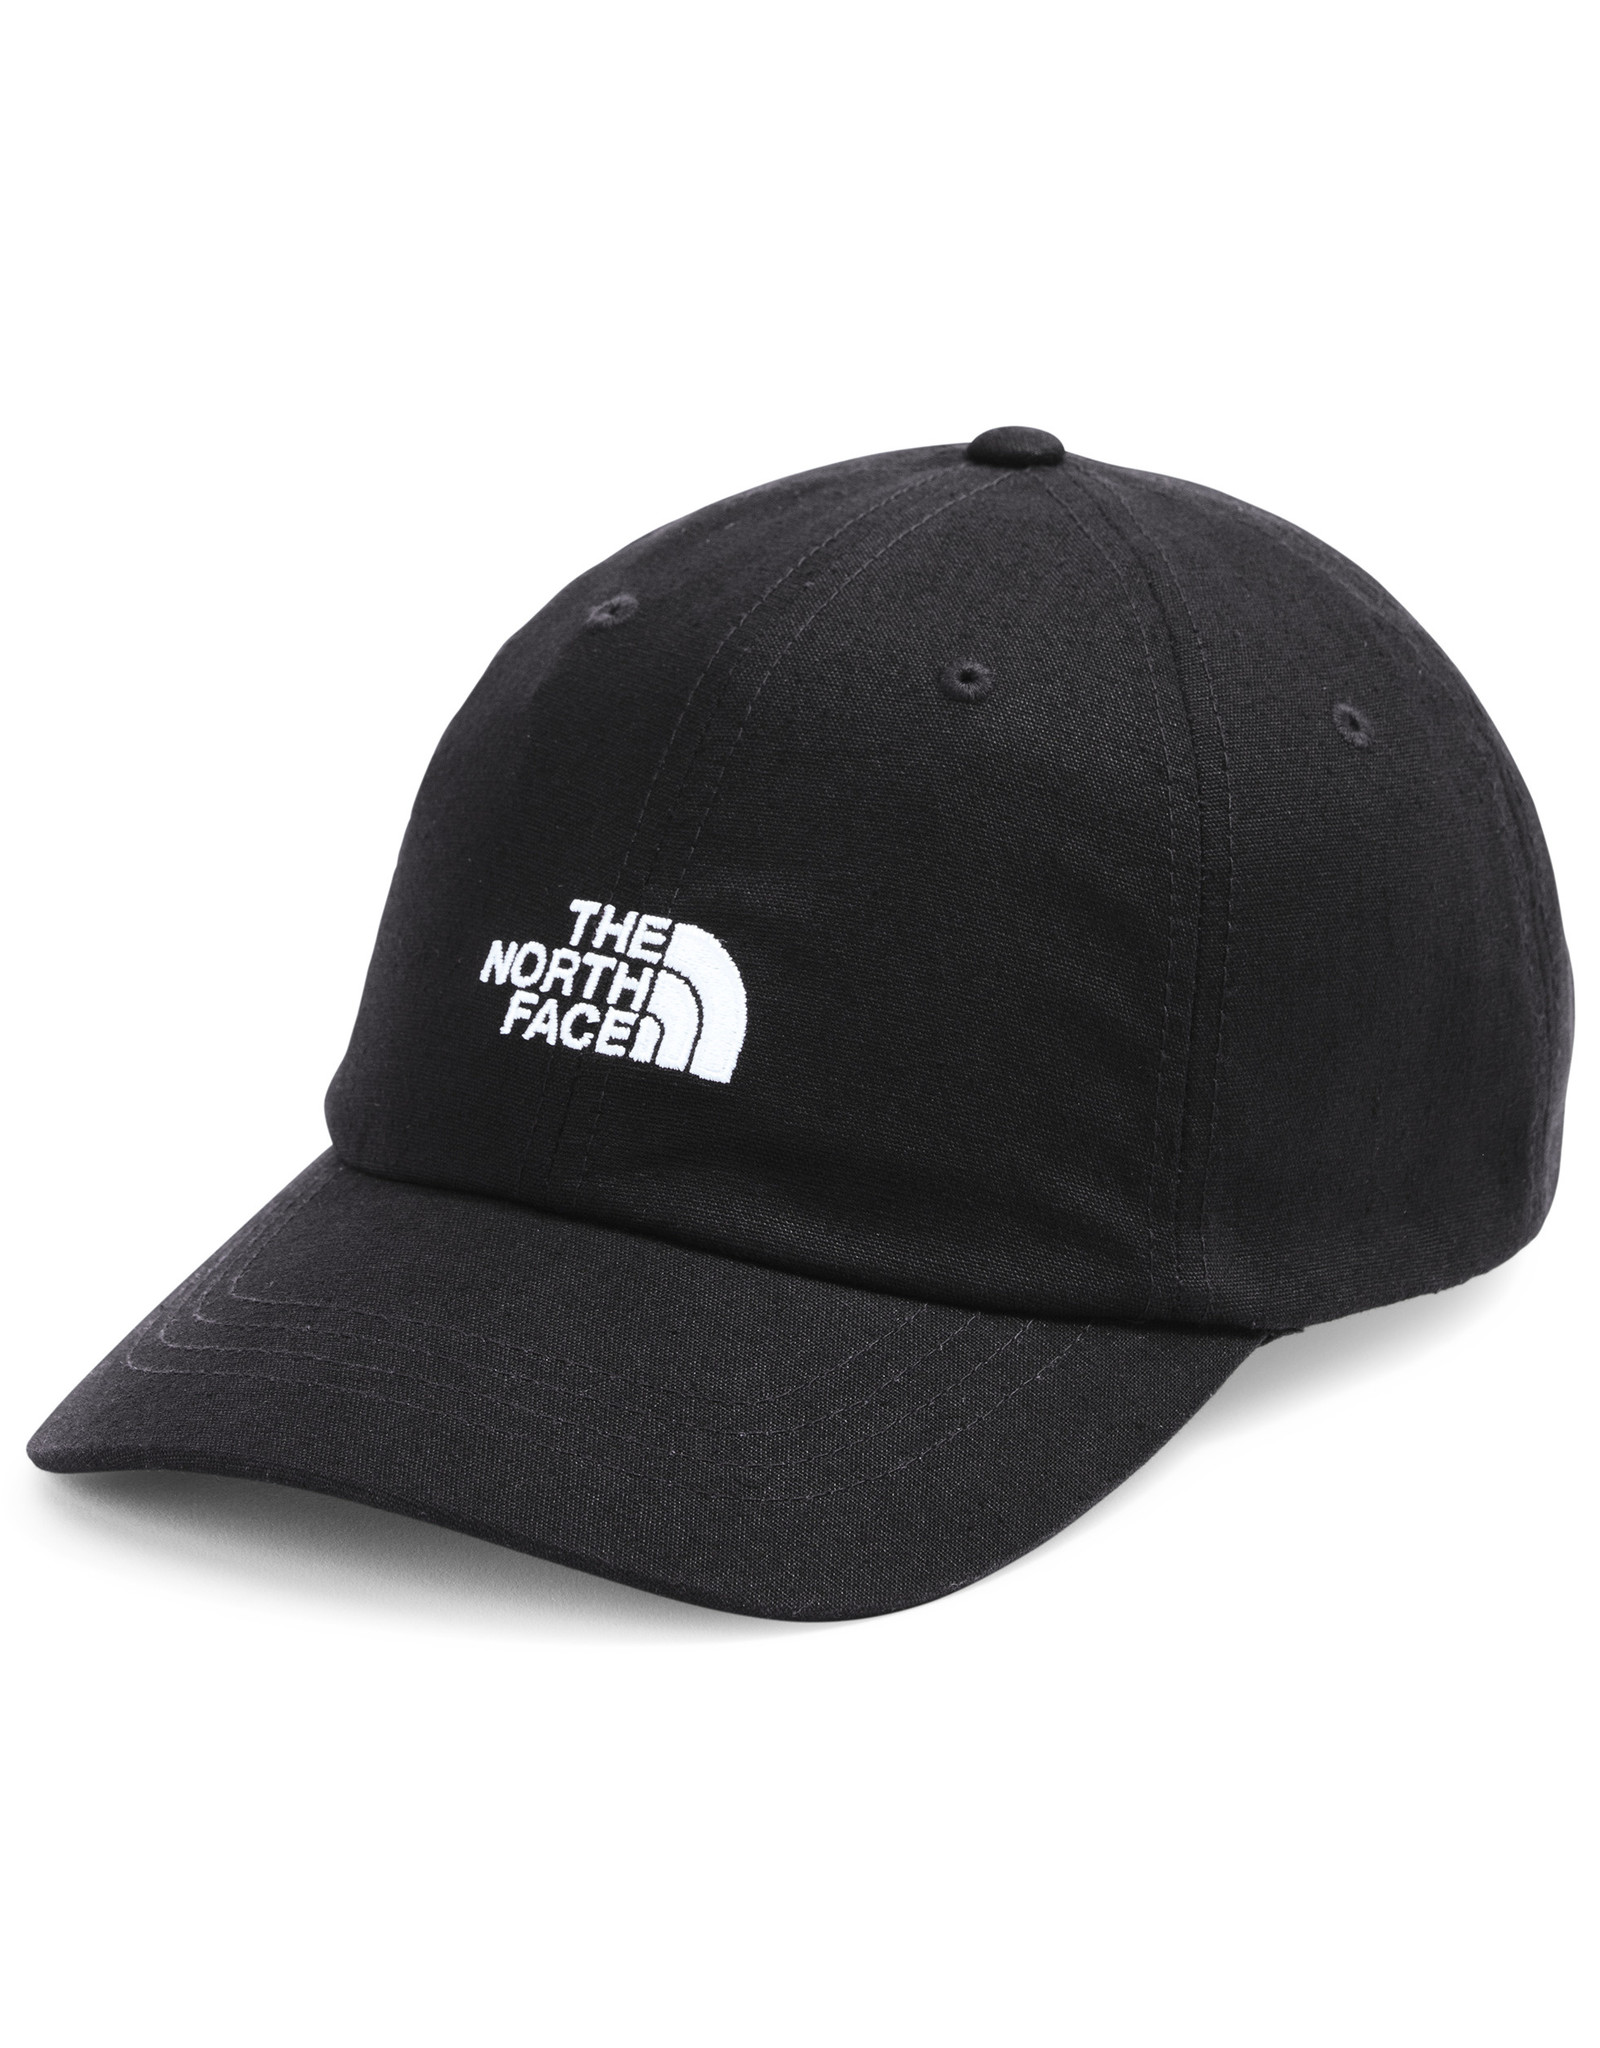 The North Face The North Face Norm Hat - S2020